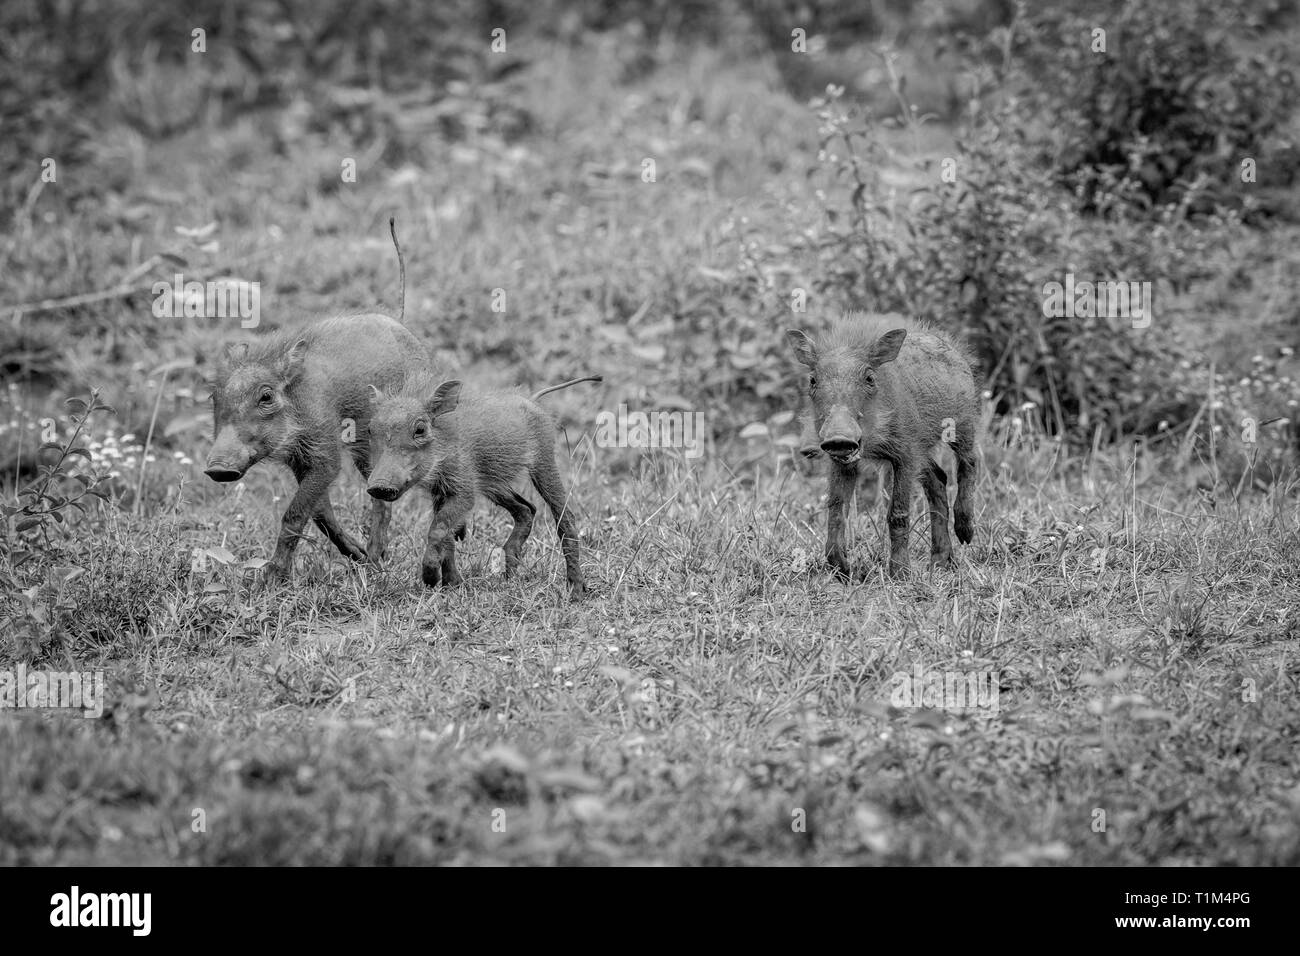 Group of baby Warthog piglets running in the grass in black and white in the Welgevonden game reserve, South Africa. Stock Photo